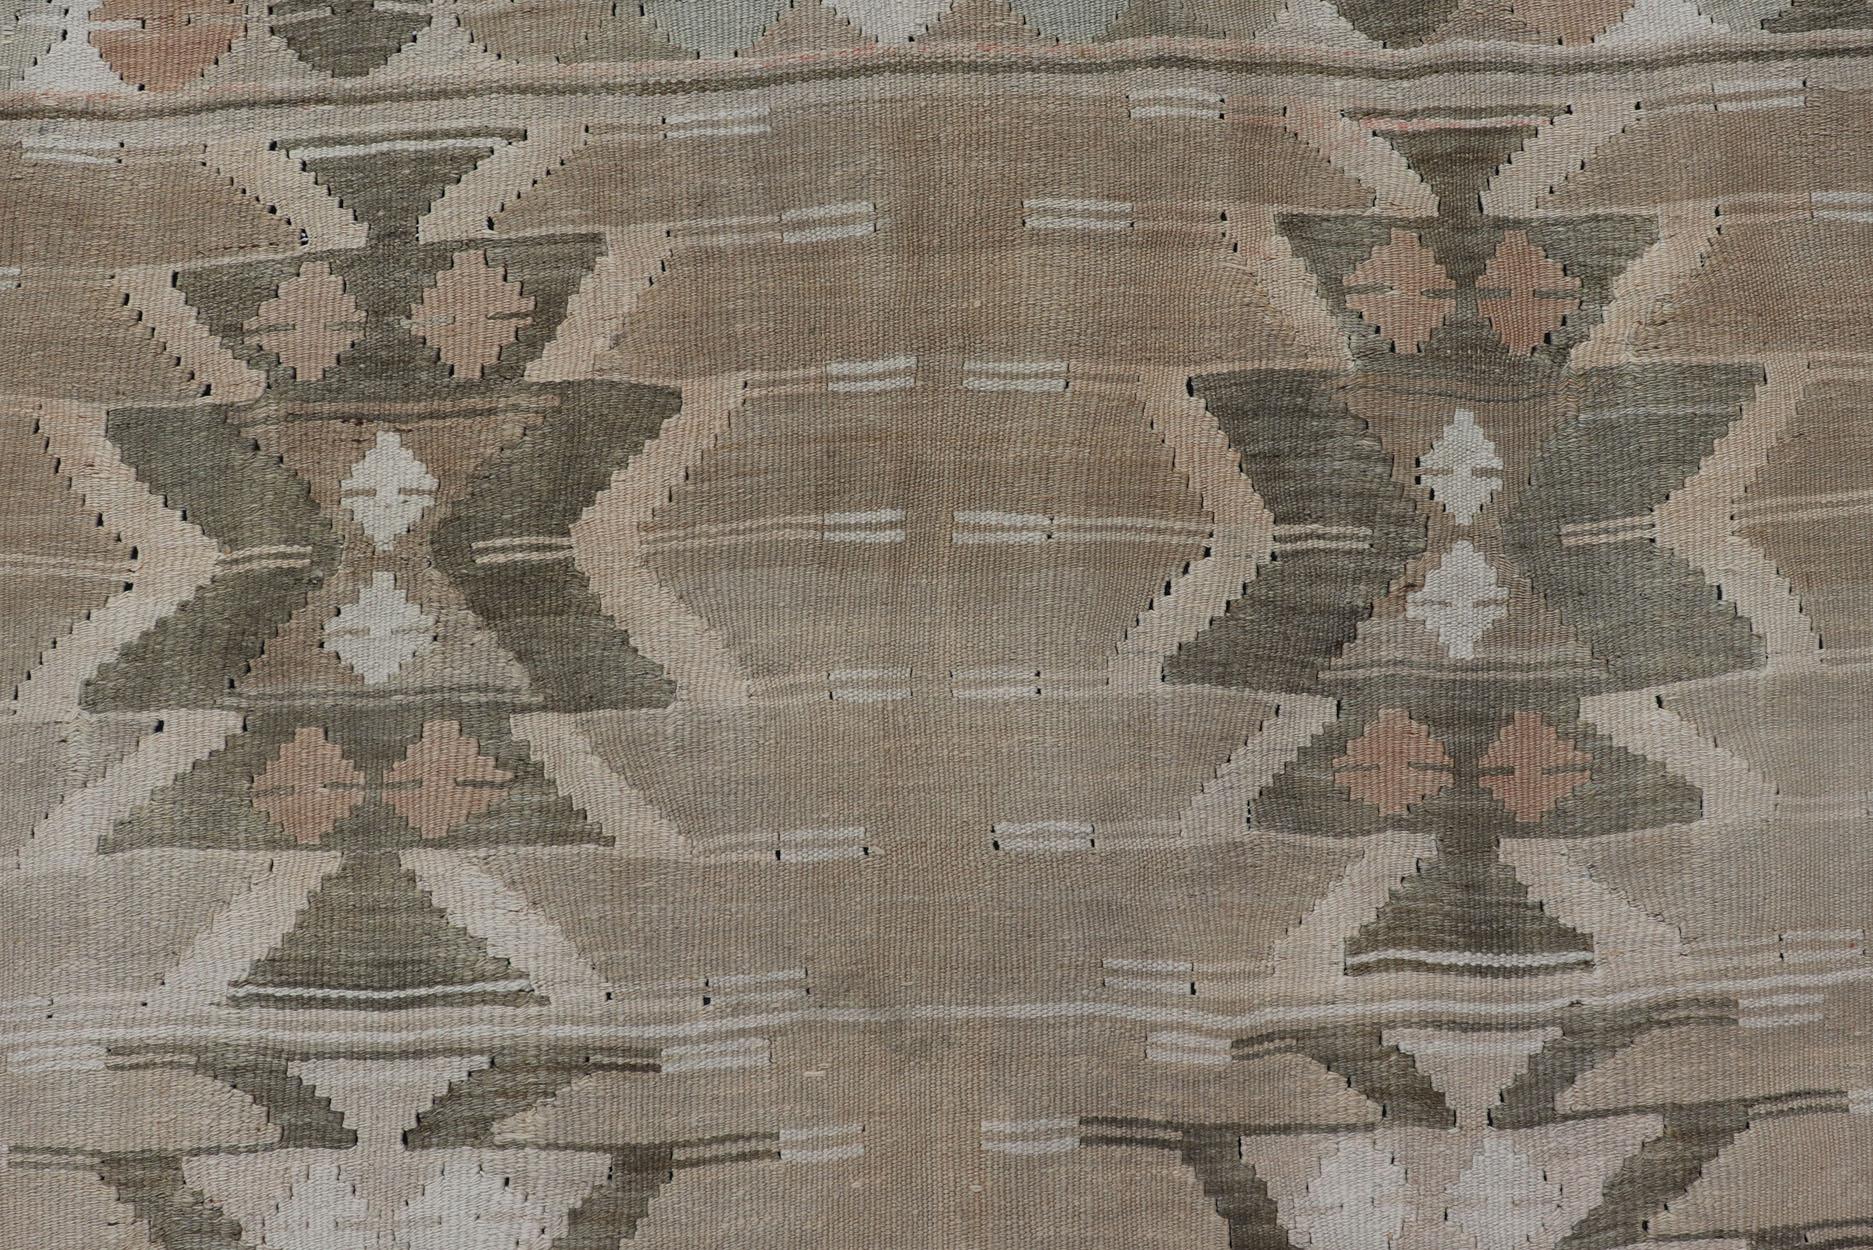 Bold Medallion Design Turkish Flat Weave Kilim rug with Earthy Tones and Green. Keivan Woven Arts / rug EN-179072, country of origin / type: Turkey / Kilim, circa 1950
This unique and stunning Turkish Kilim was made in the 1950's with a warm taupe